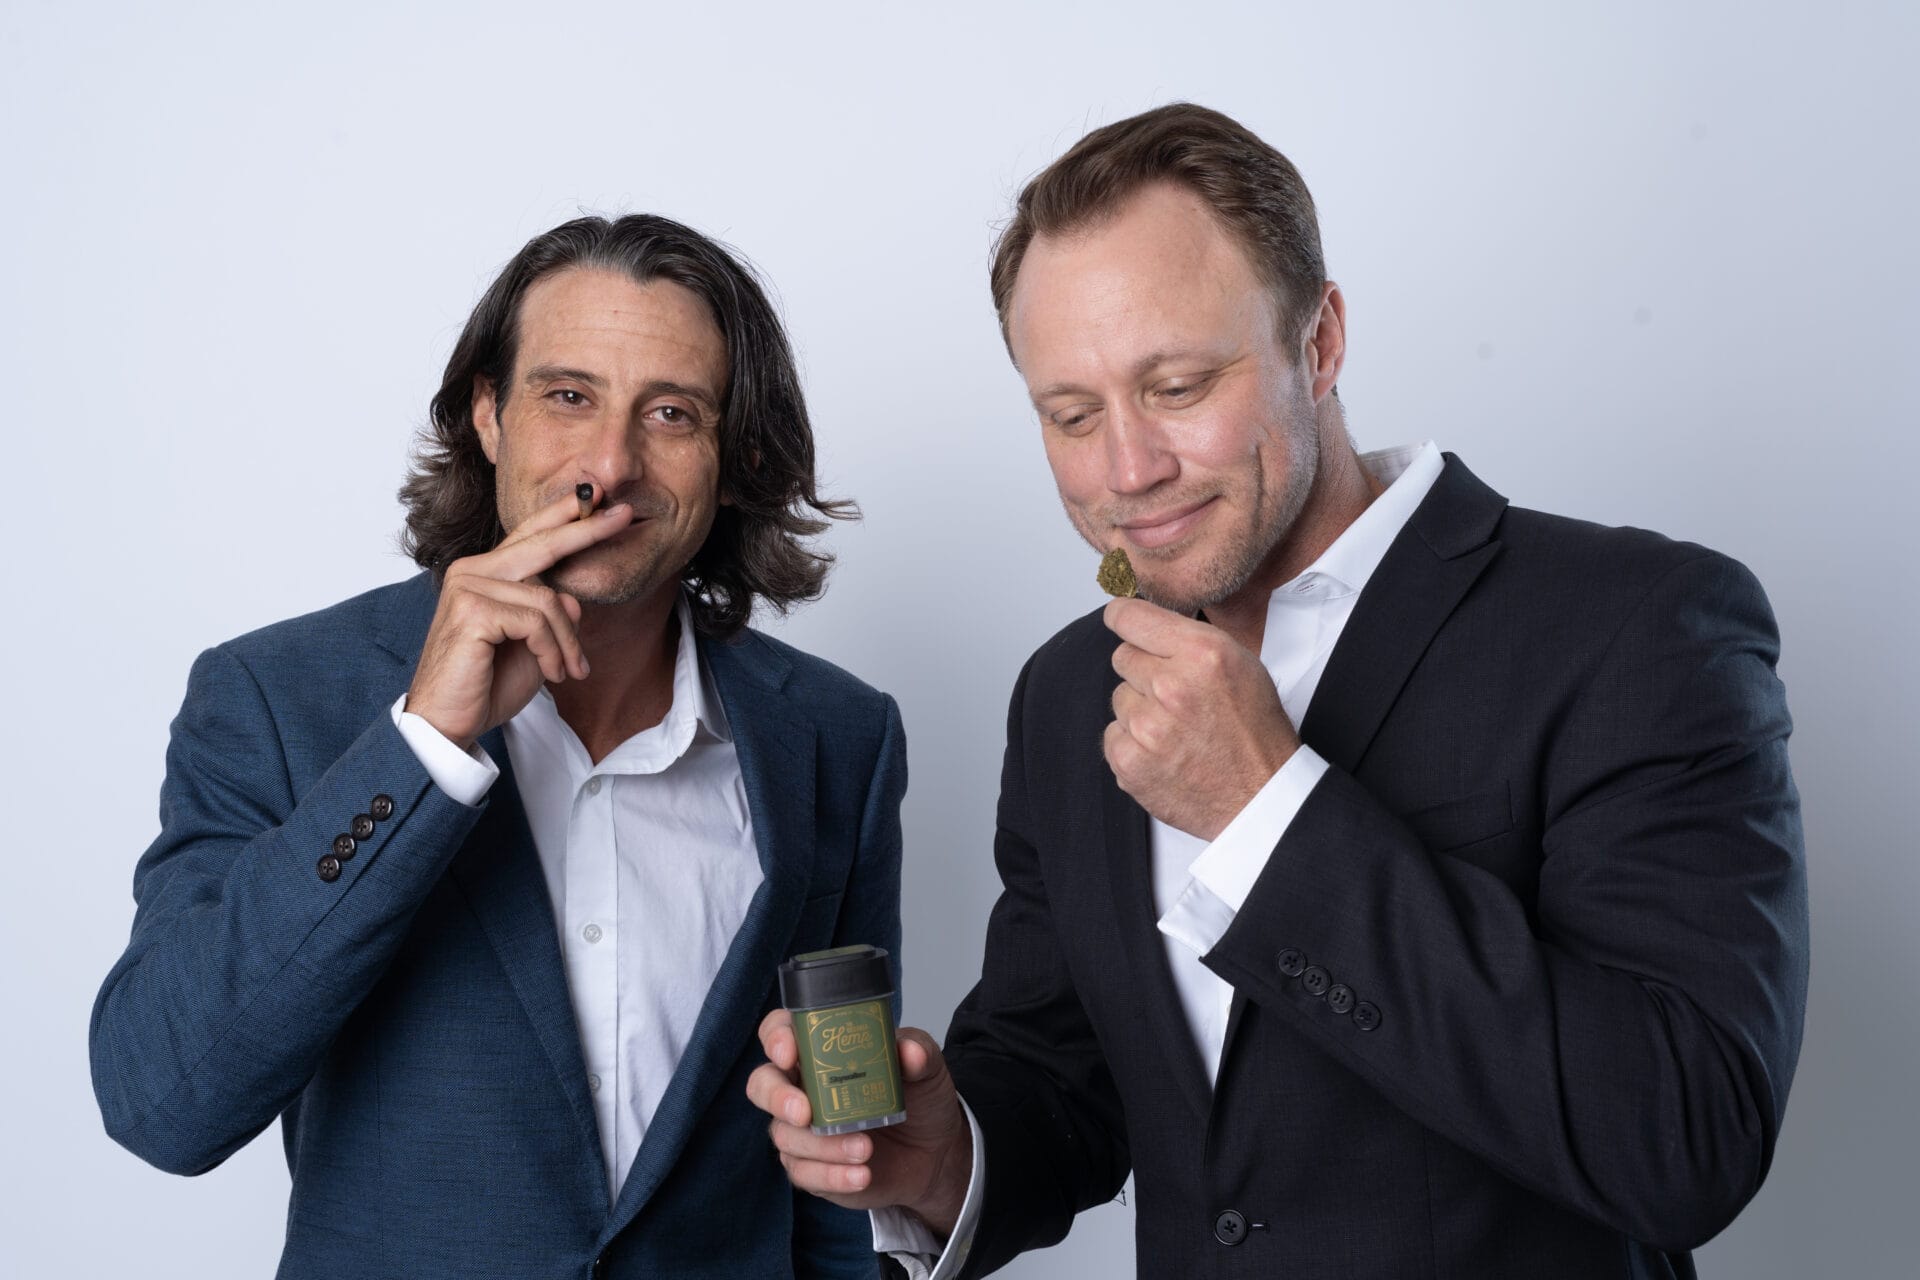 The Georgia Hemp Company Founders Joe Salome and Ryan Dills standing side by side with a jar of hemp and a lit joint